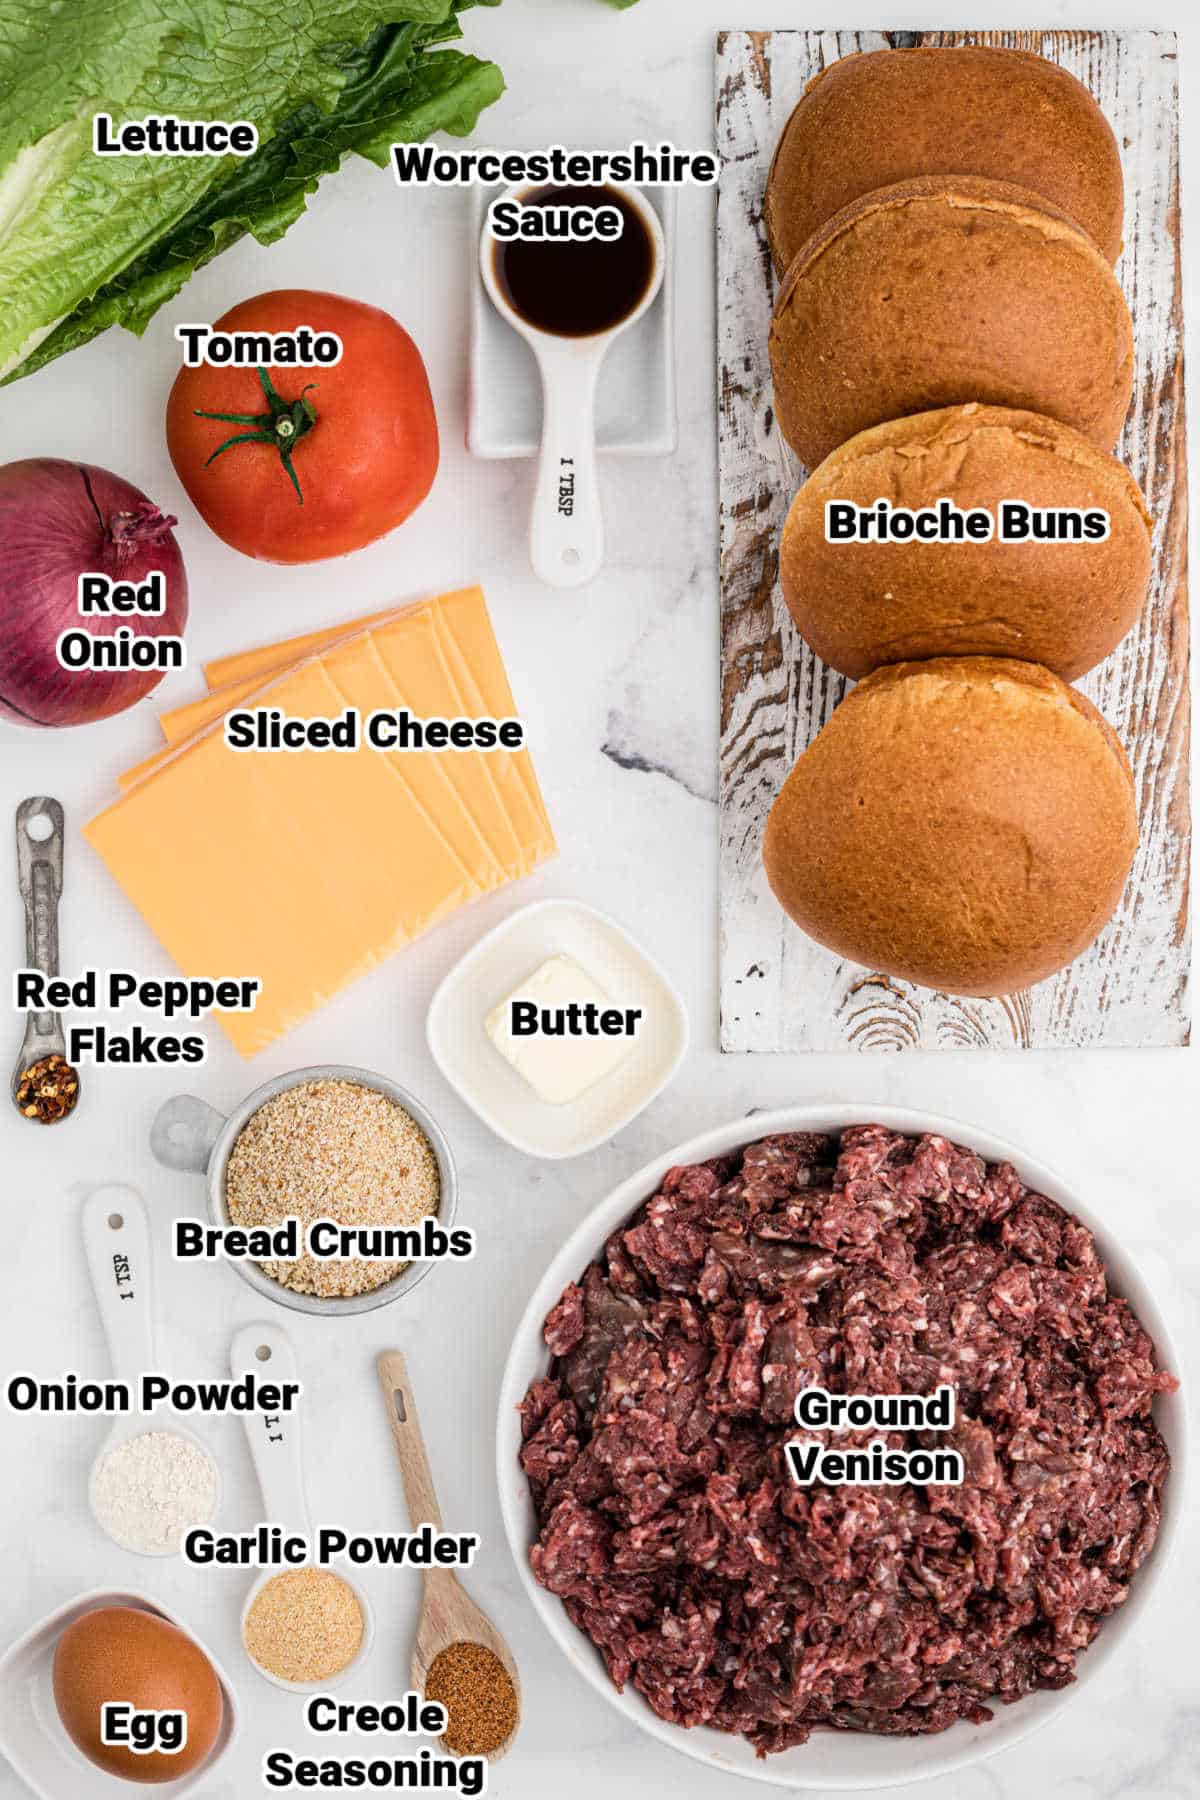 ingredients that go into venison burgers, all laid out